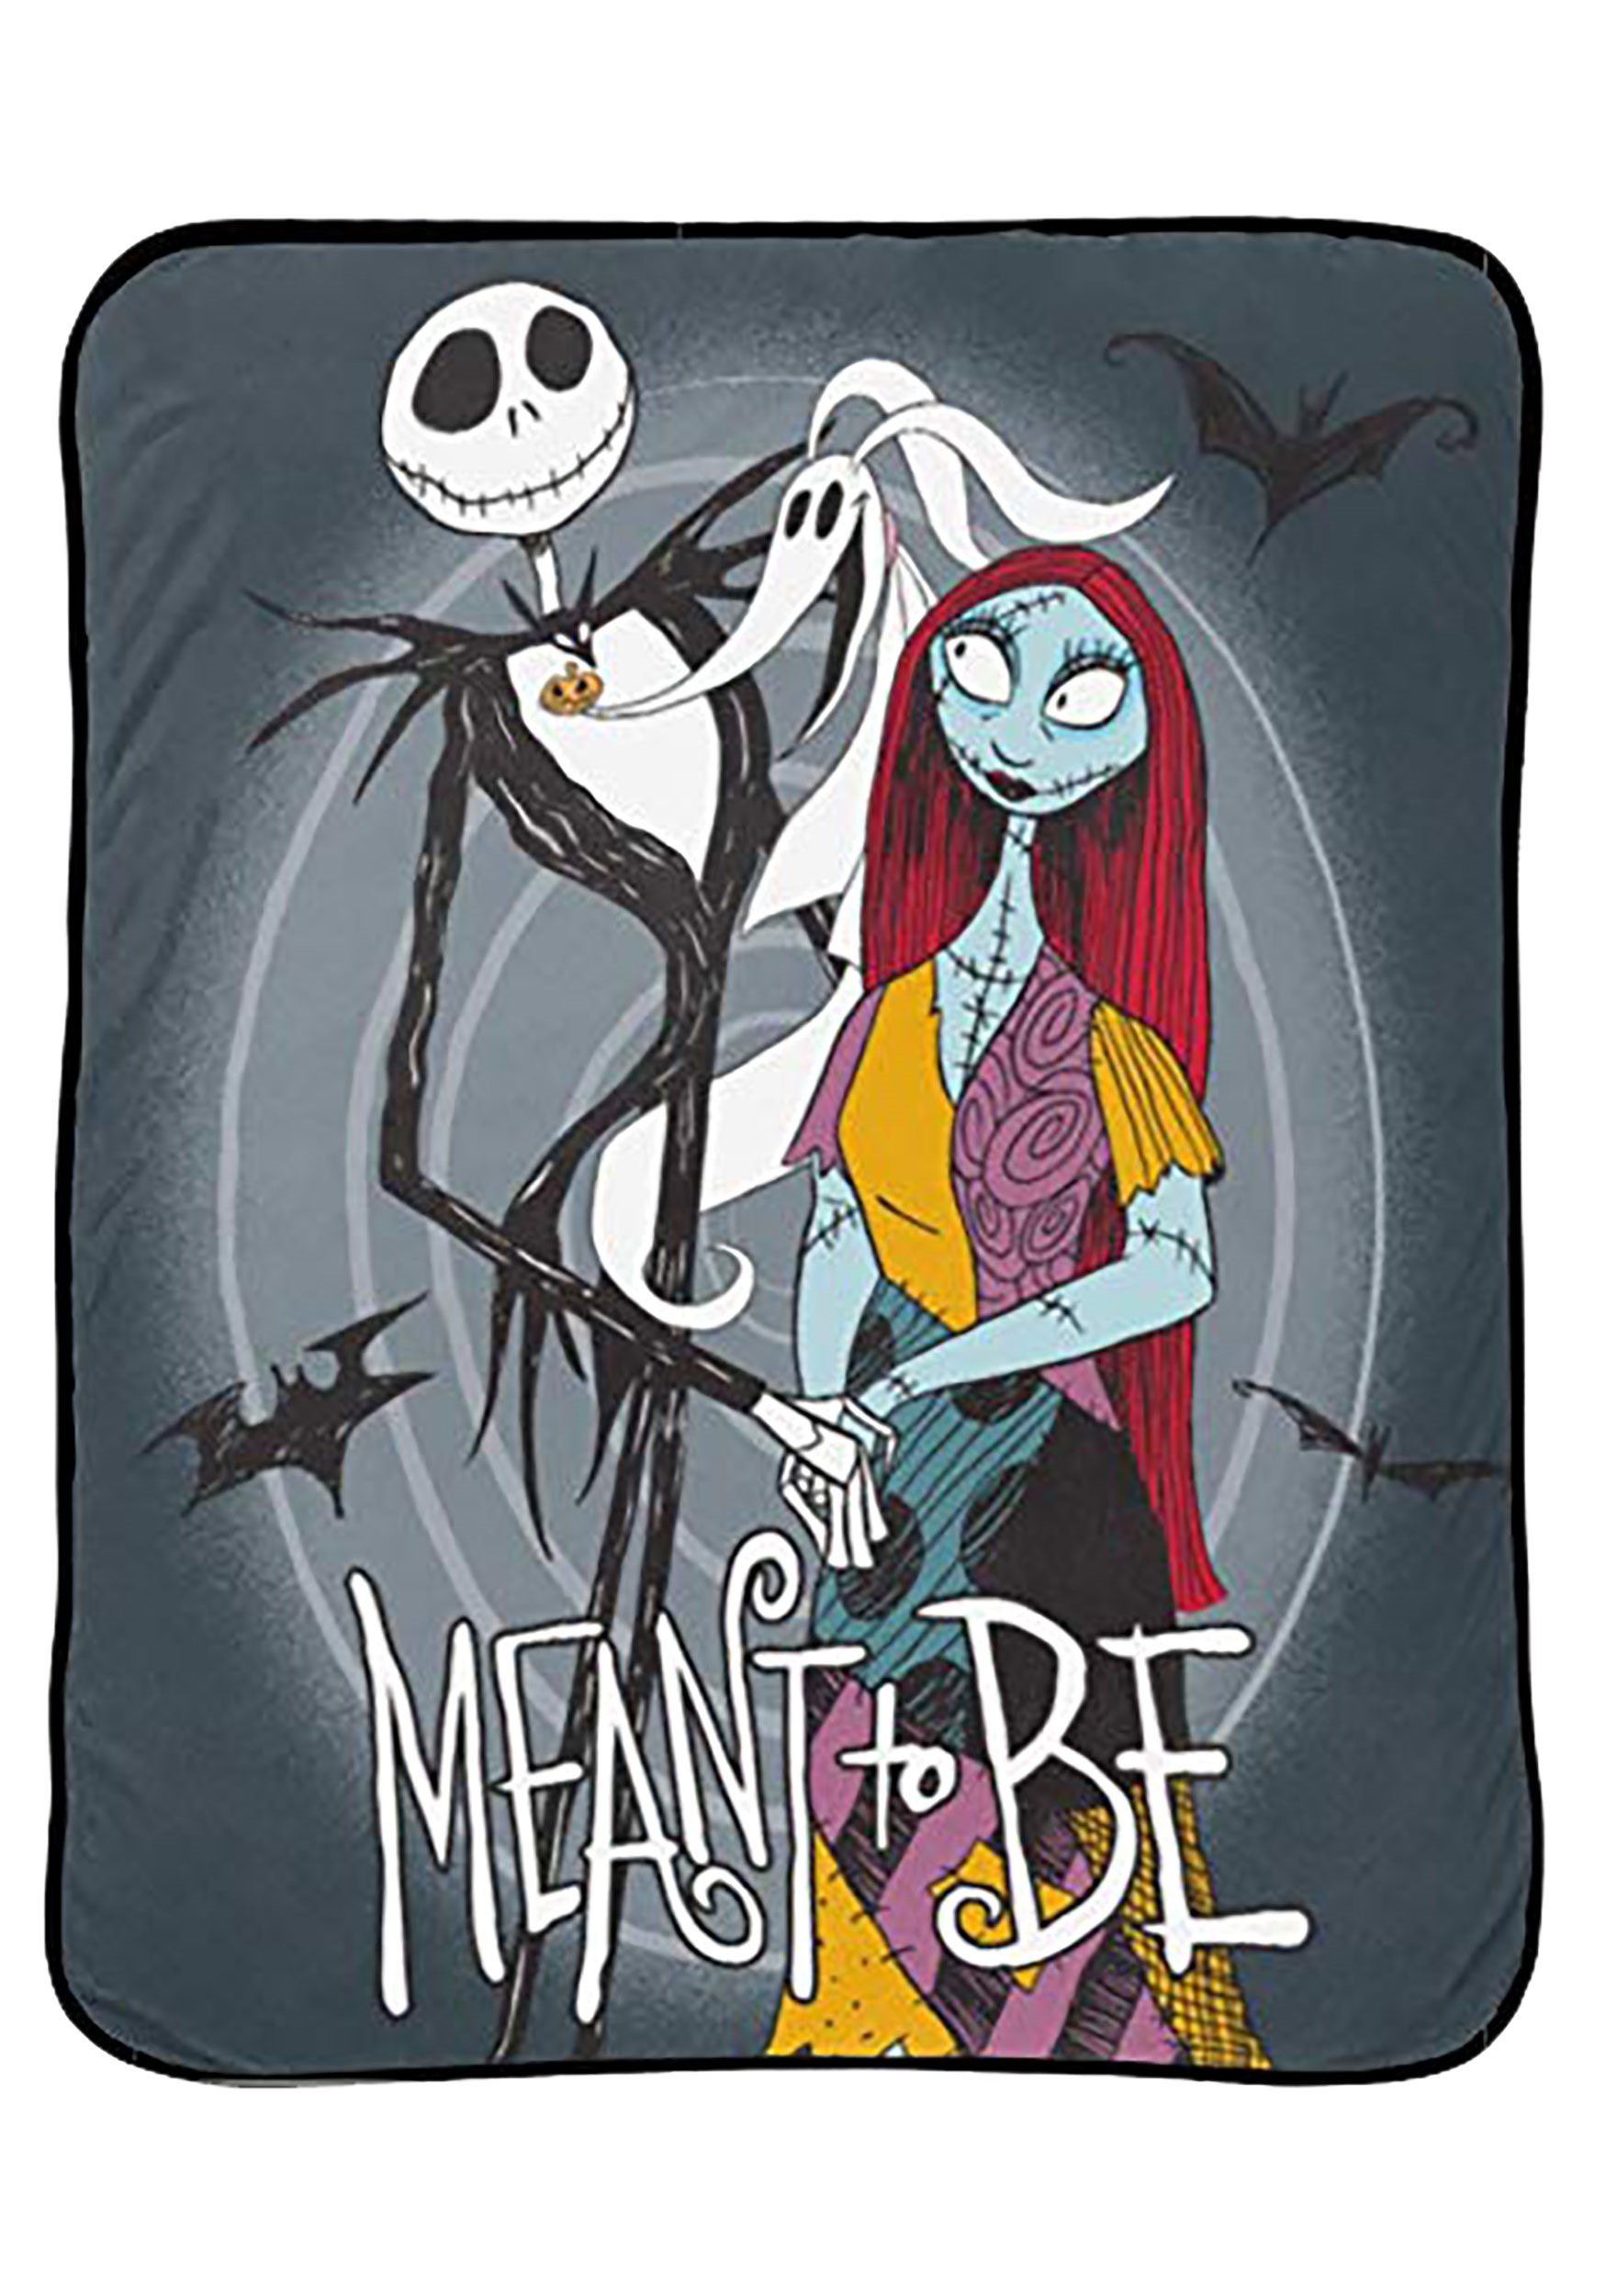 Nightmare Before Christmas Jack and Sally 'Meant to Be' Throw Blanket